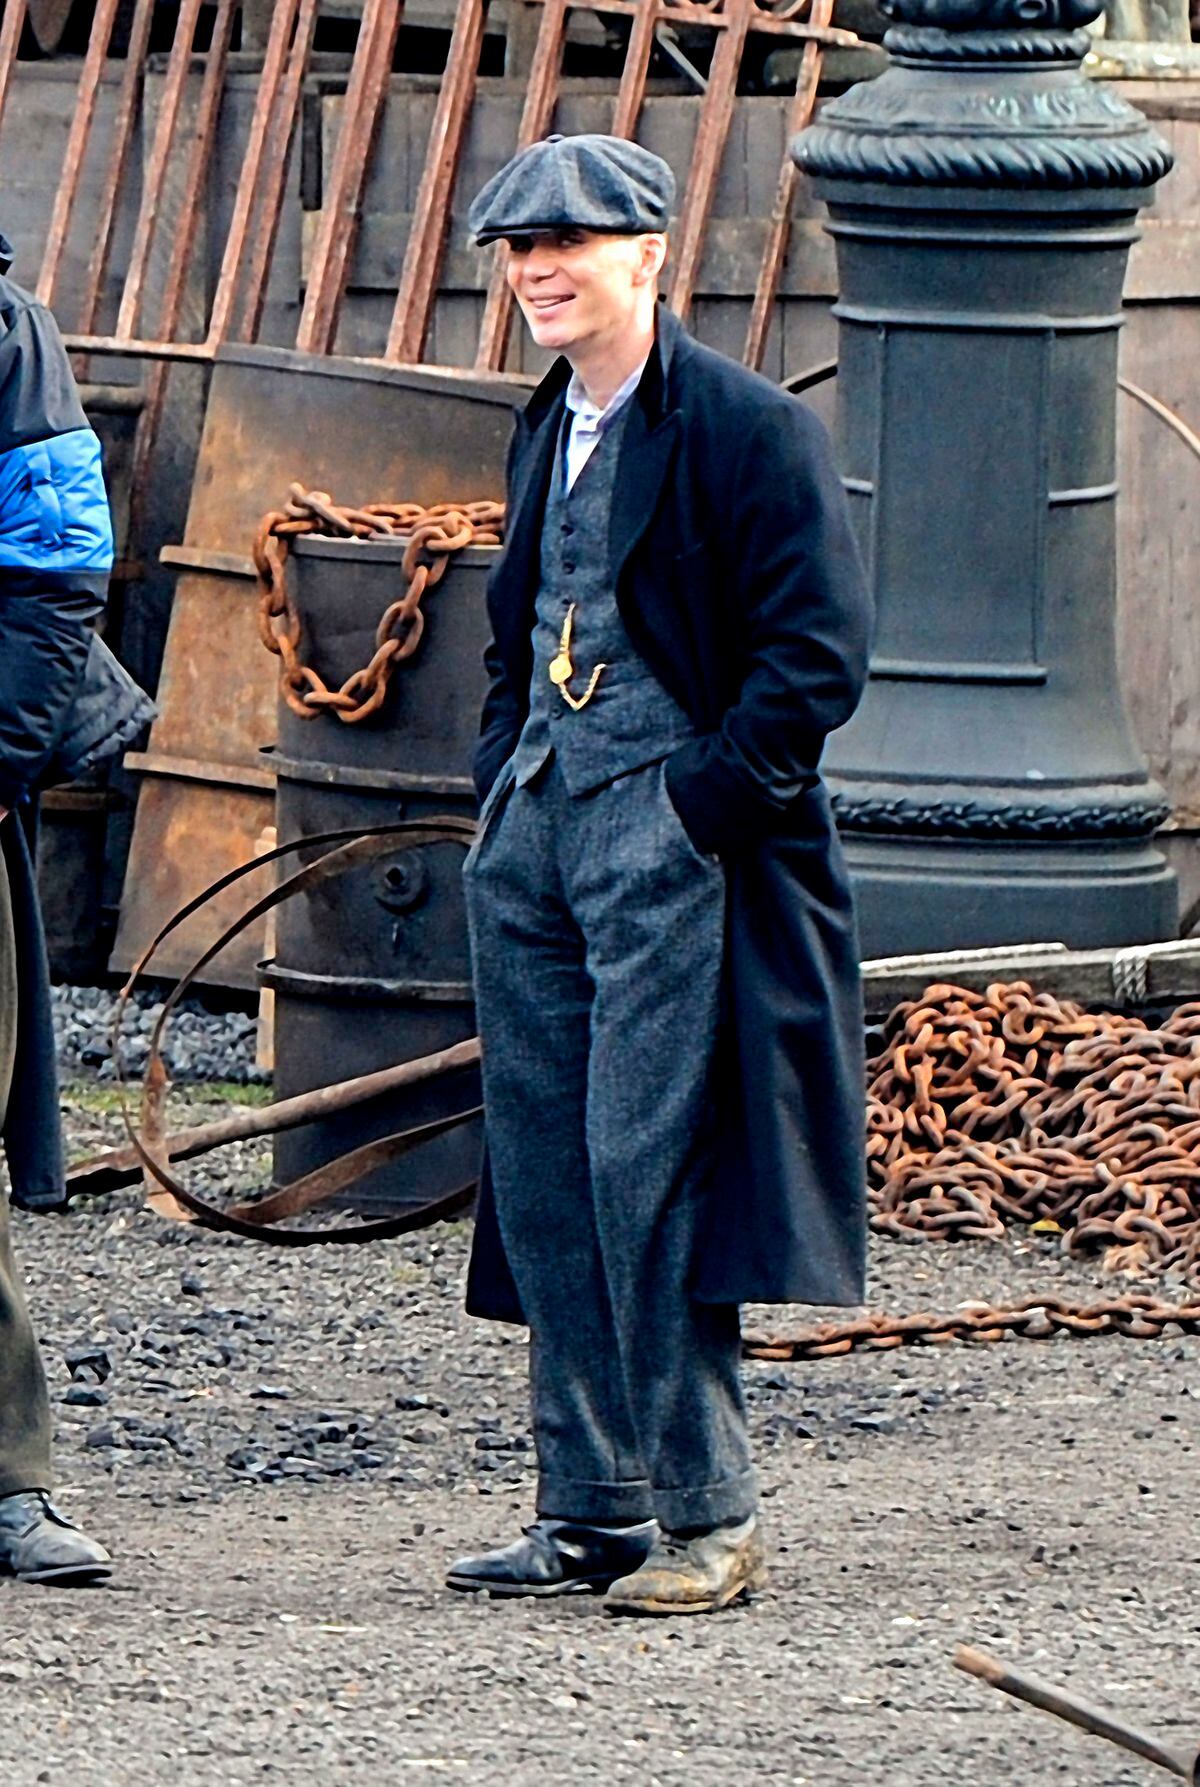 Cillian Murphy filming Peaky Blinders at the Black Country Museum in 2014